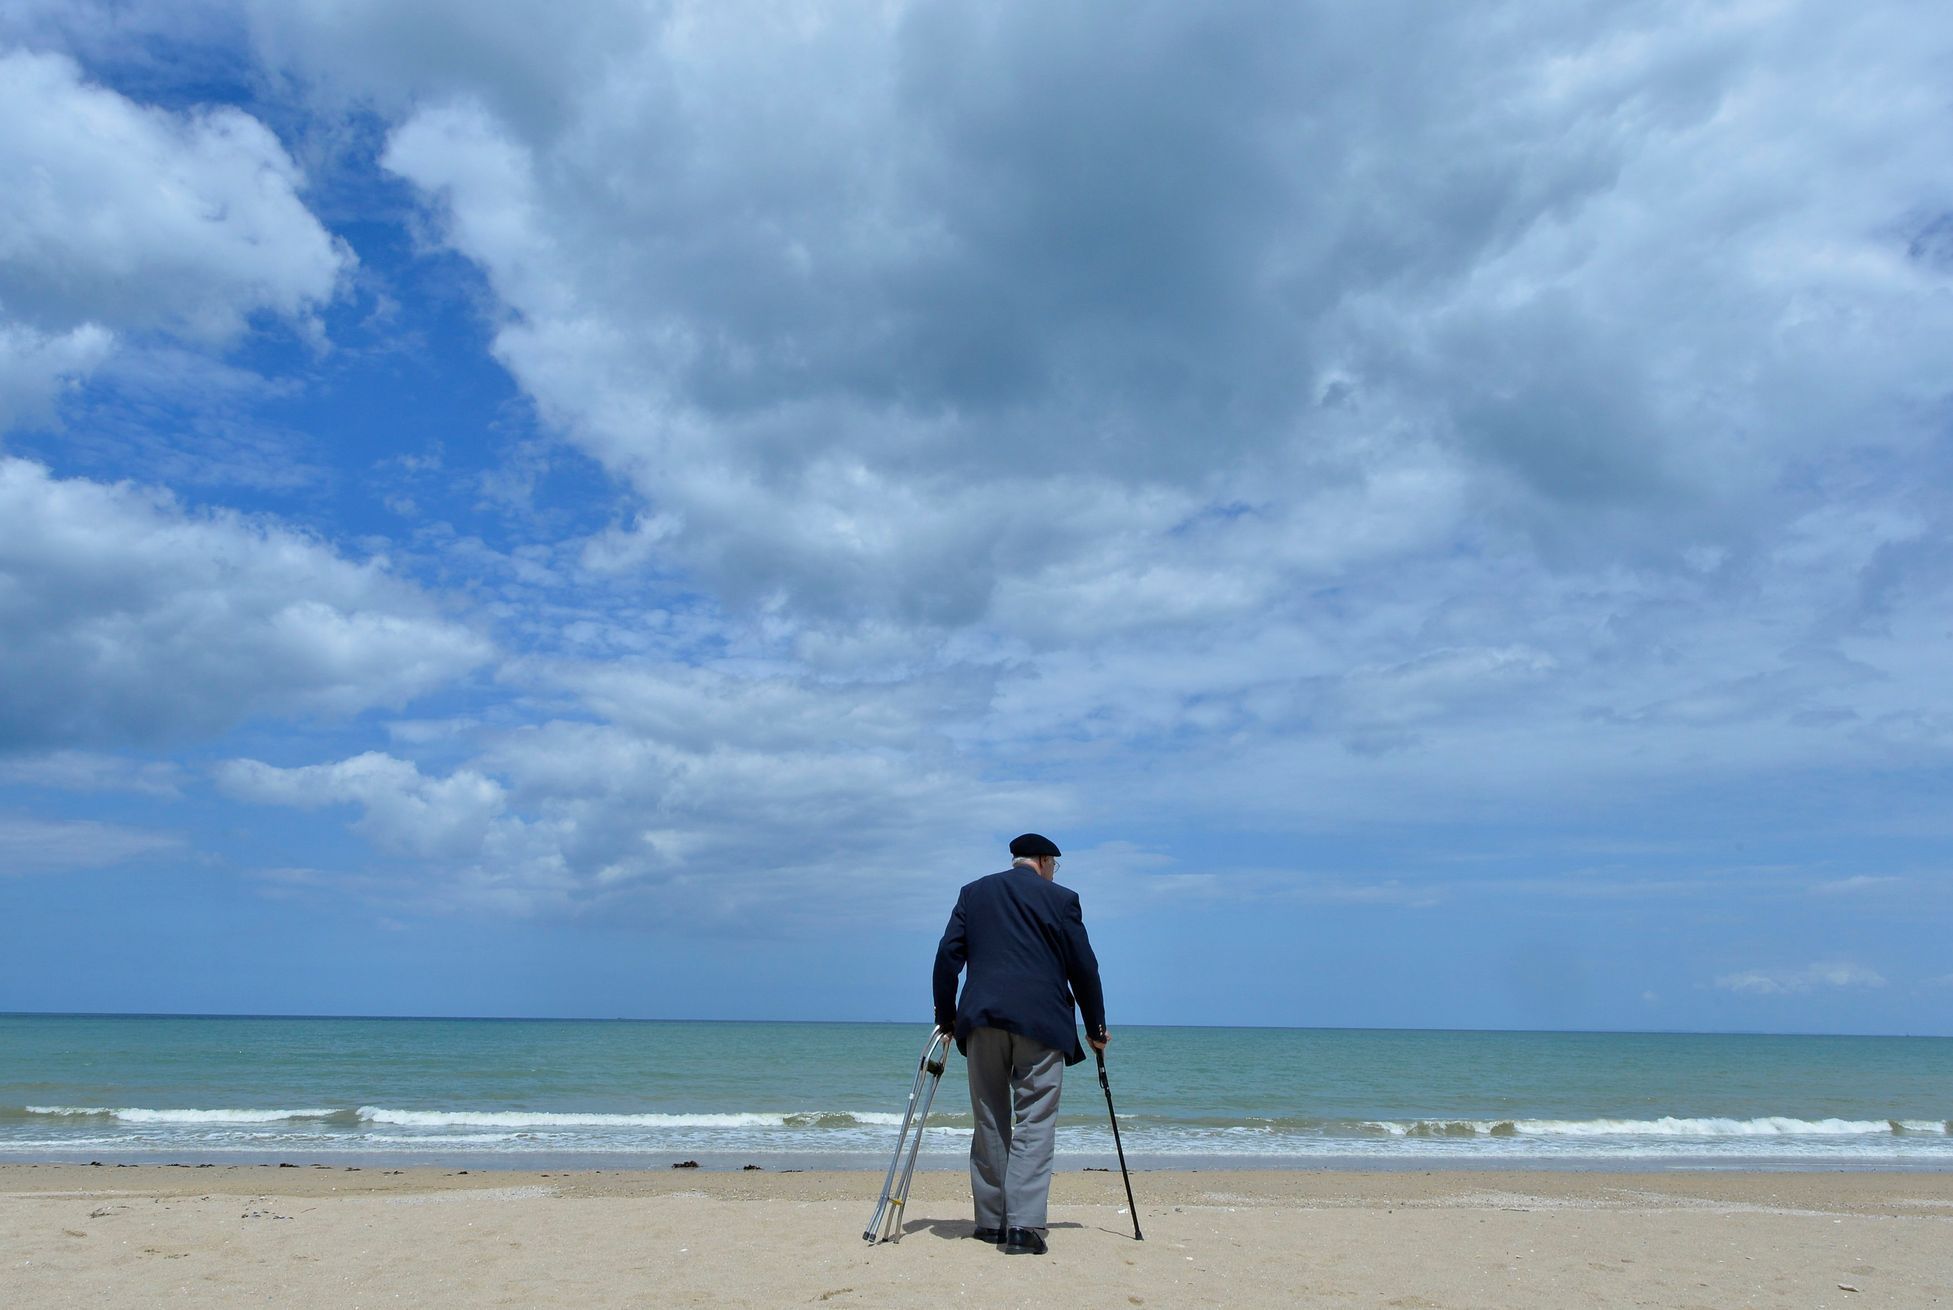 British D-Day veteran, Gordon Smith, 90, from Wiltshire, walks on Sword Beach at Hermanville-sur-Mer on the Normandy coast